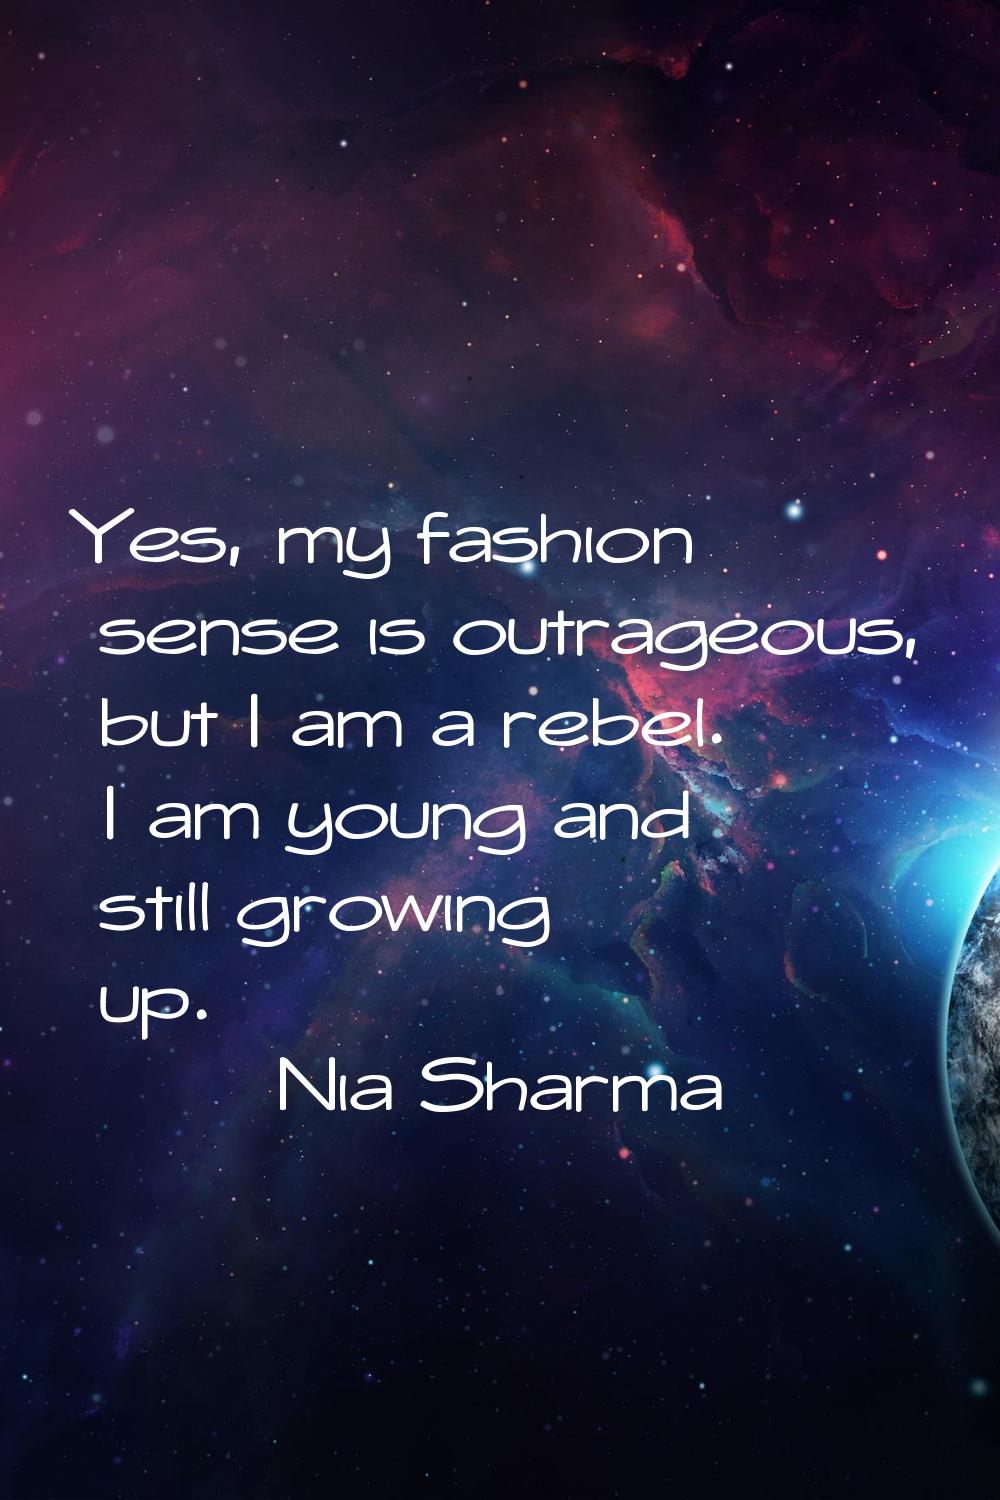 Yes, my fashion sense is outrageous, but I am a rebel. I am young and still growing up.